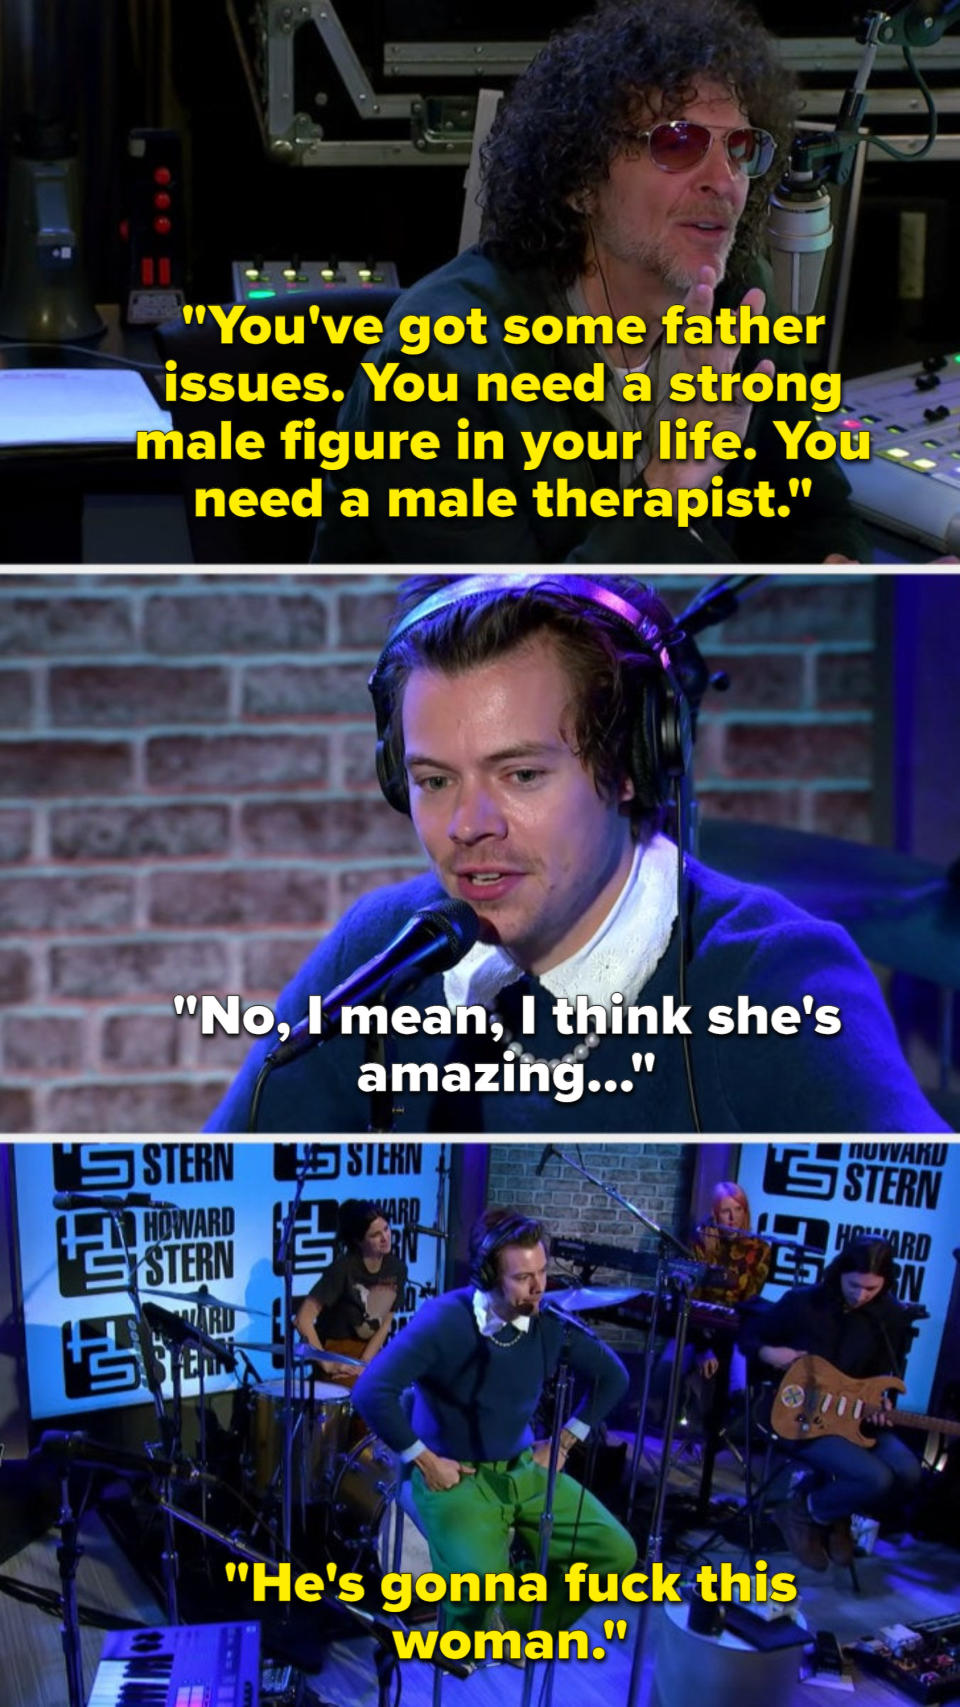 Howard telling harry he should have a male therapist instead, and then making a joke about how harry's going to fuck his female therapist